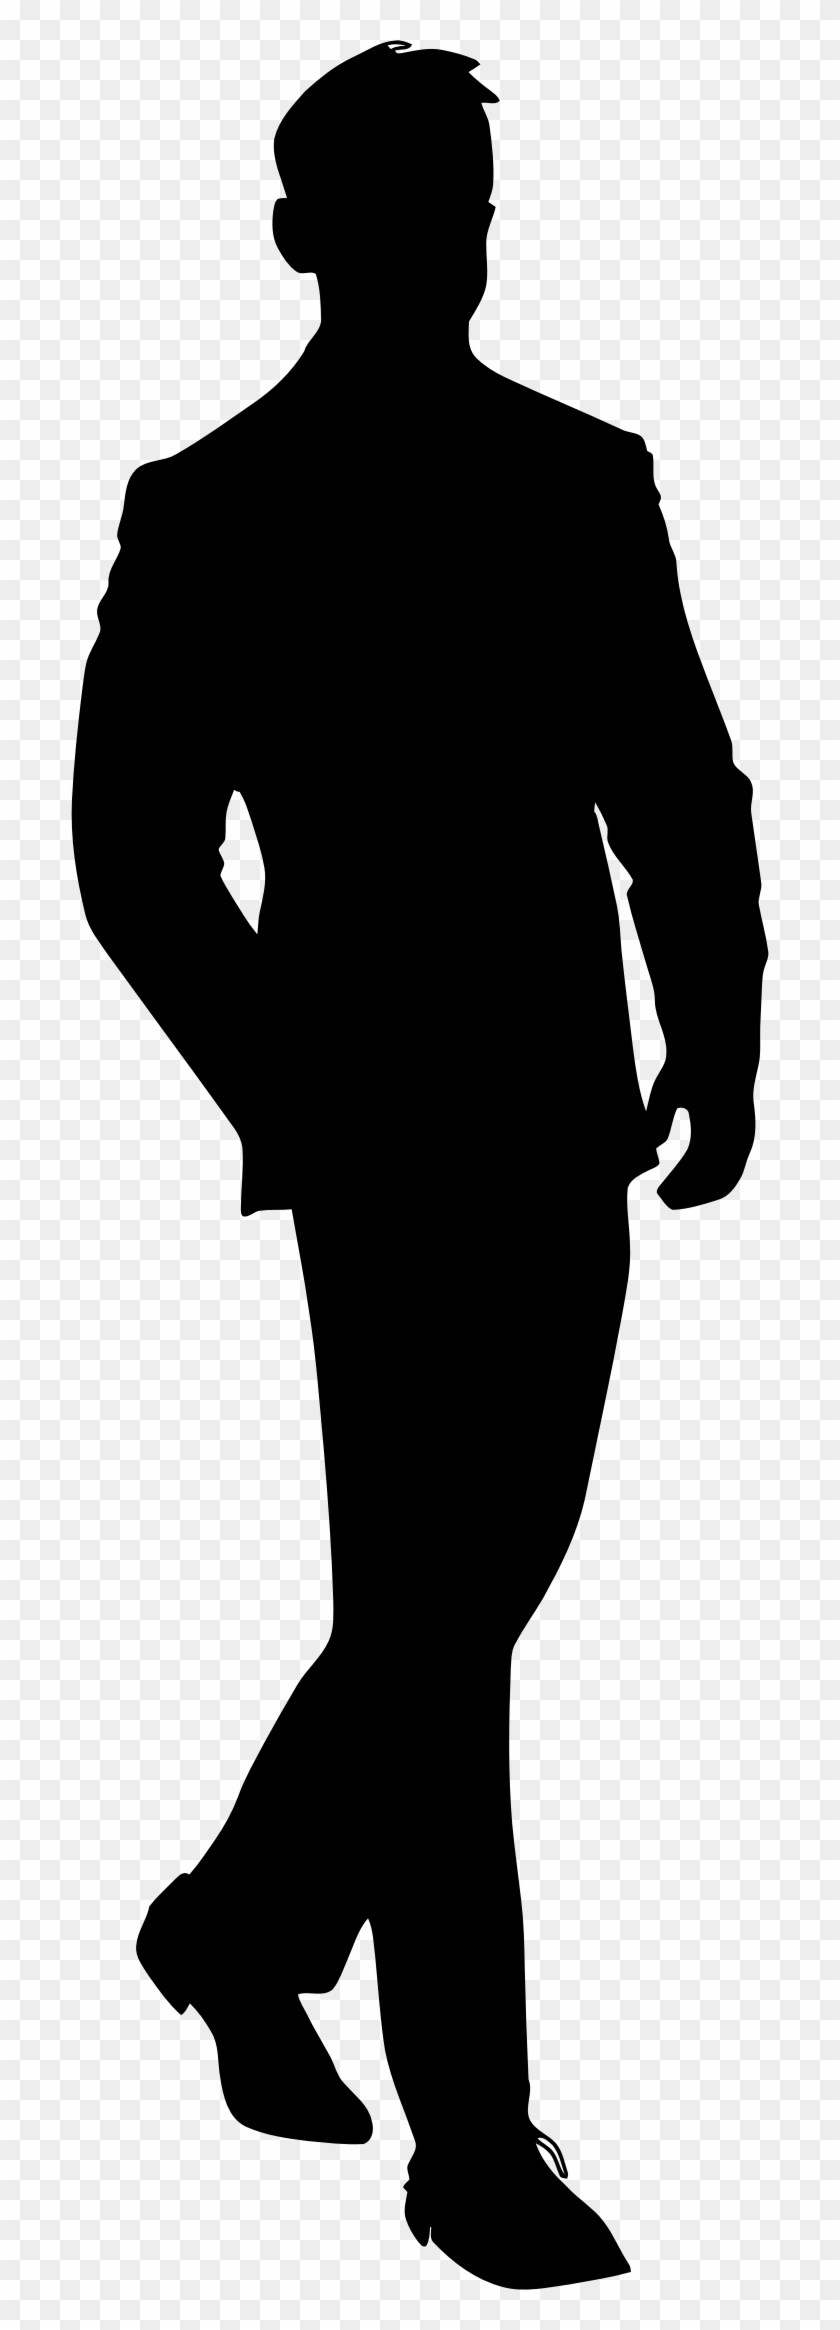 Suit Clipart Man In Black - Man Silhouette Png #15774